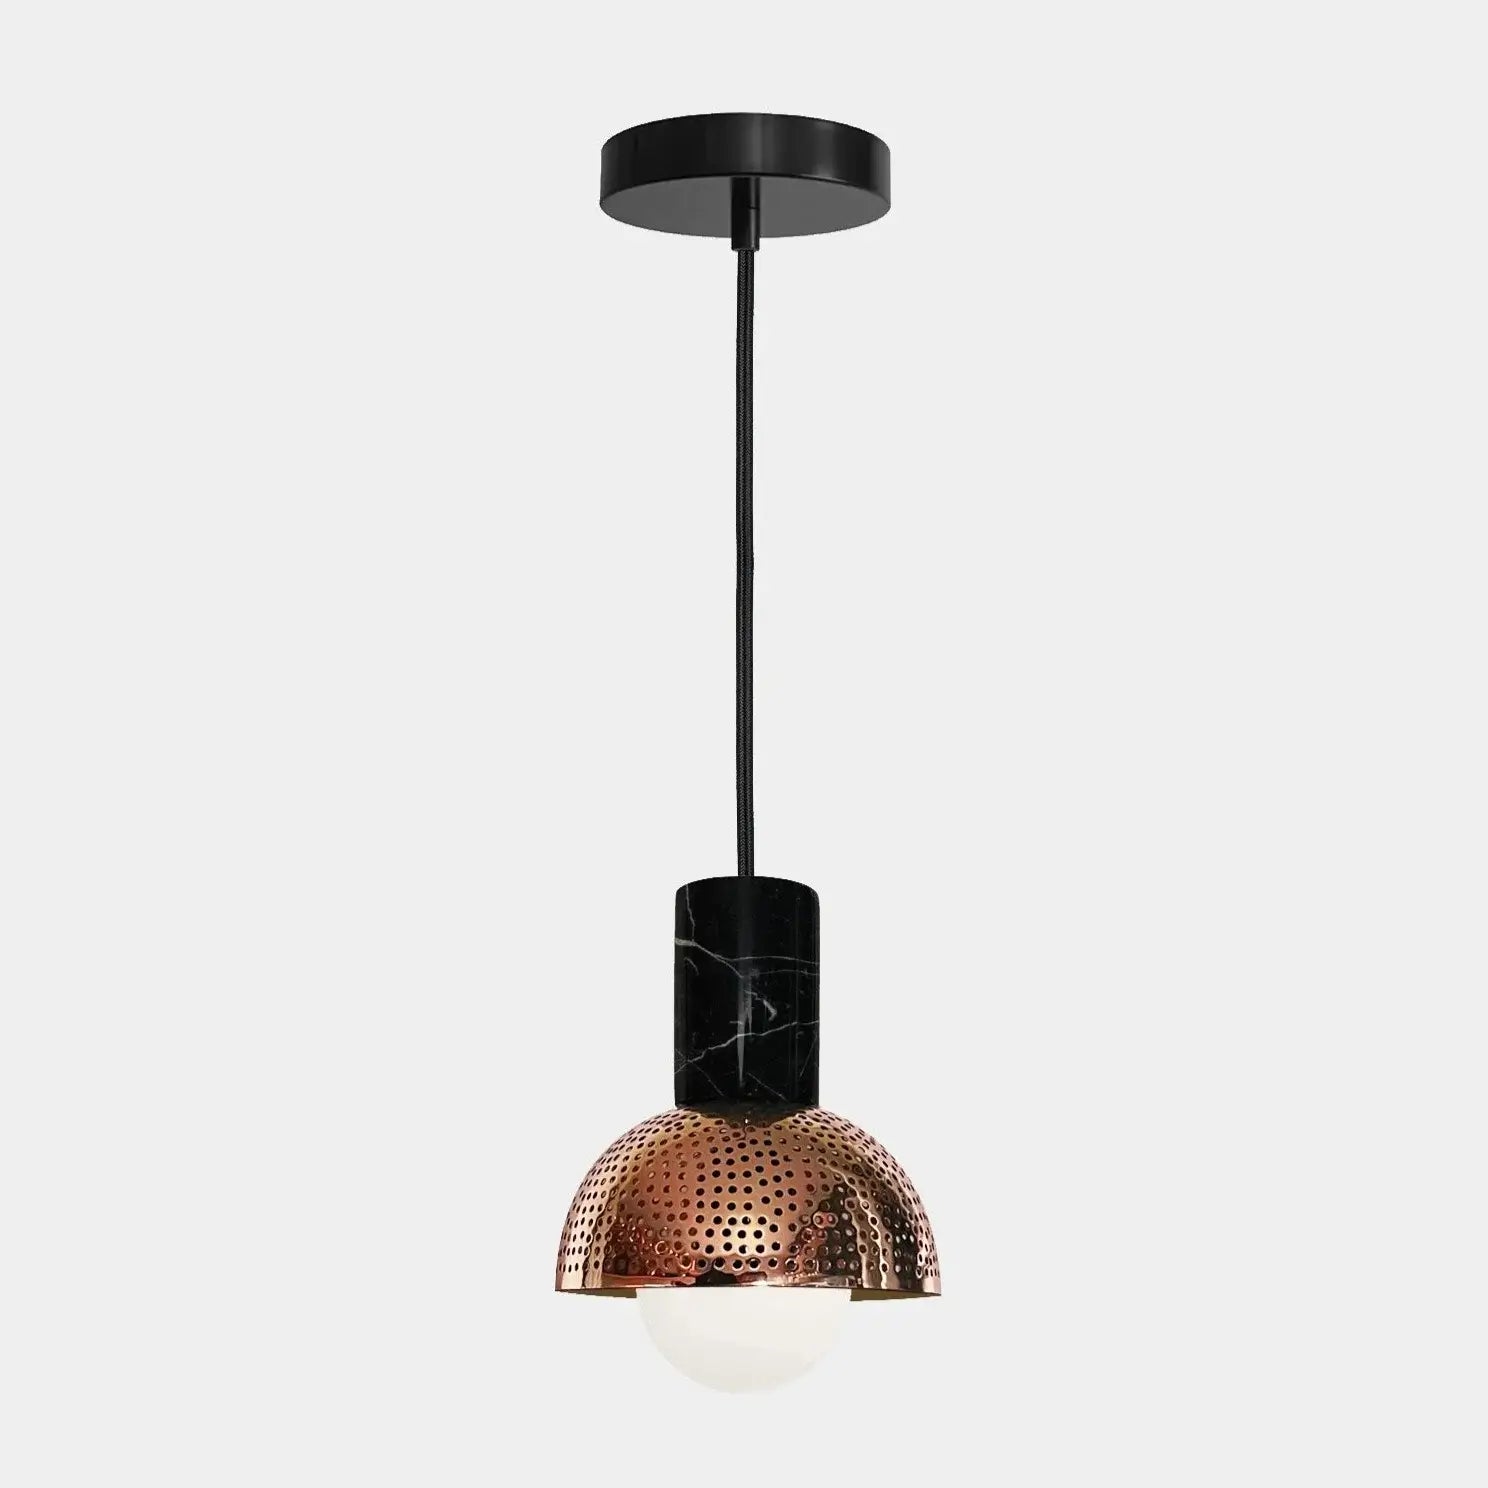 Dounia home Pendant light in Polished copper made of Metal, Model: maria marble dome